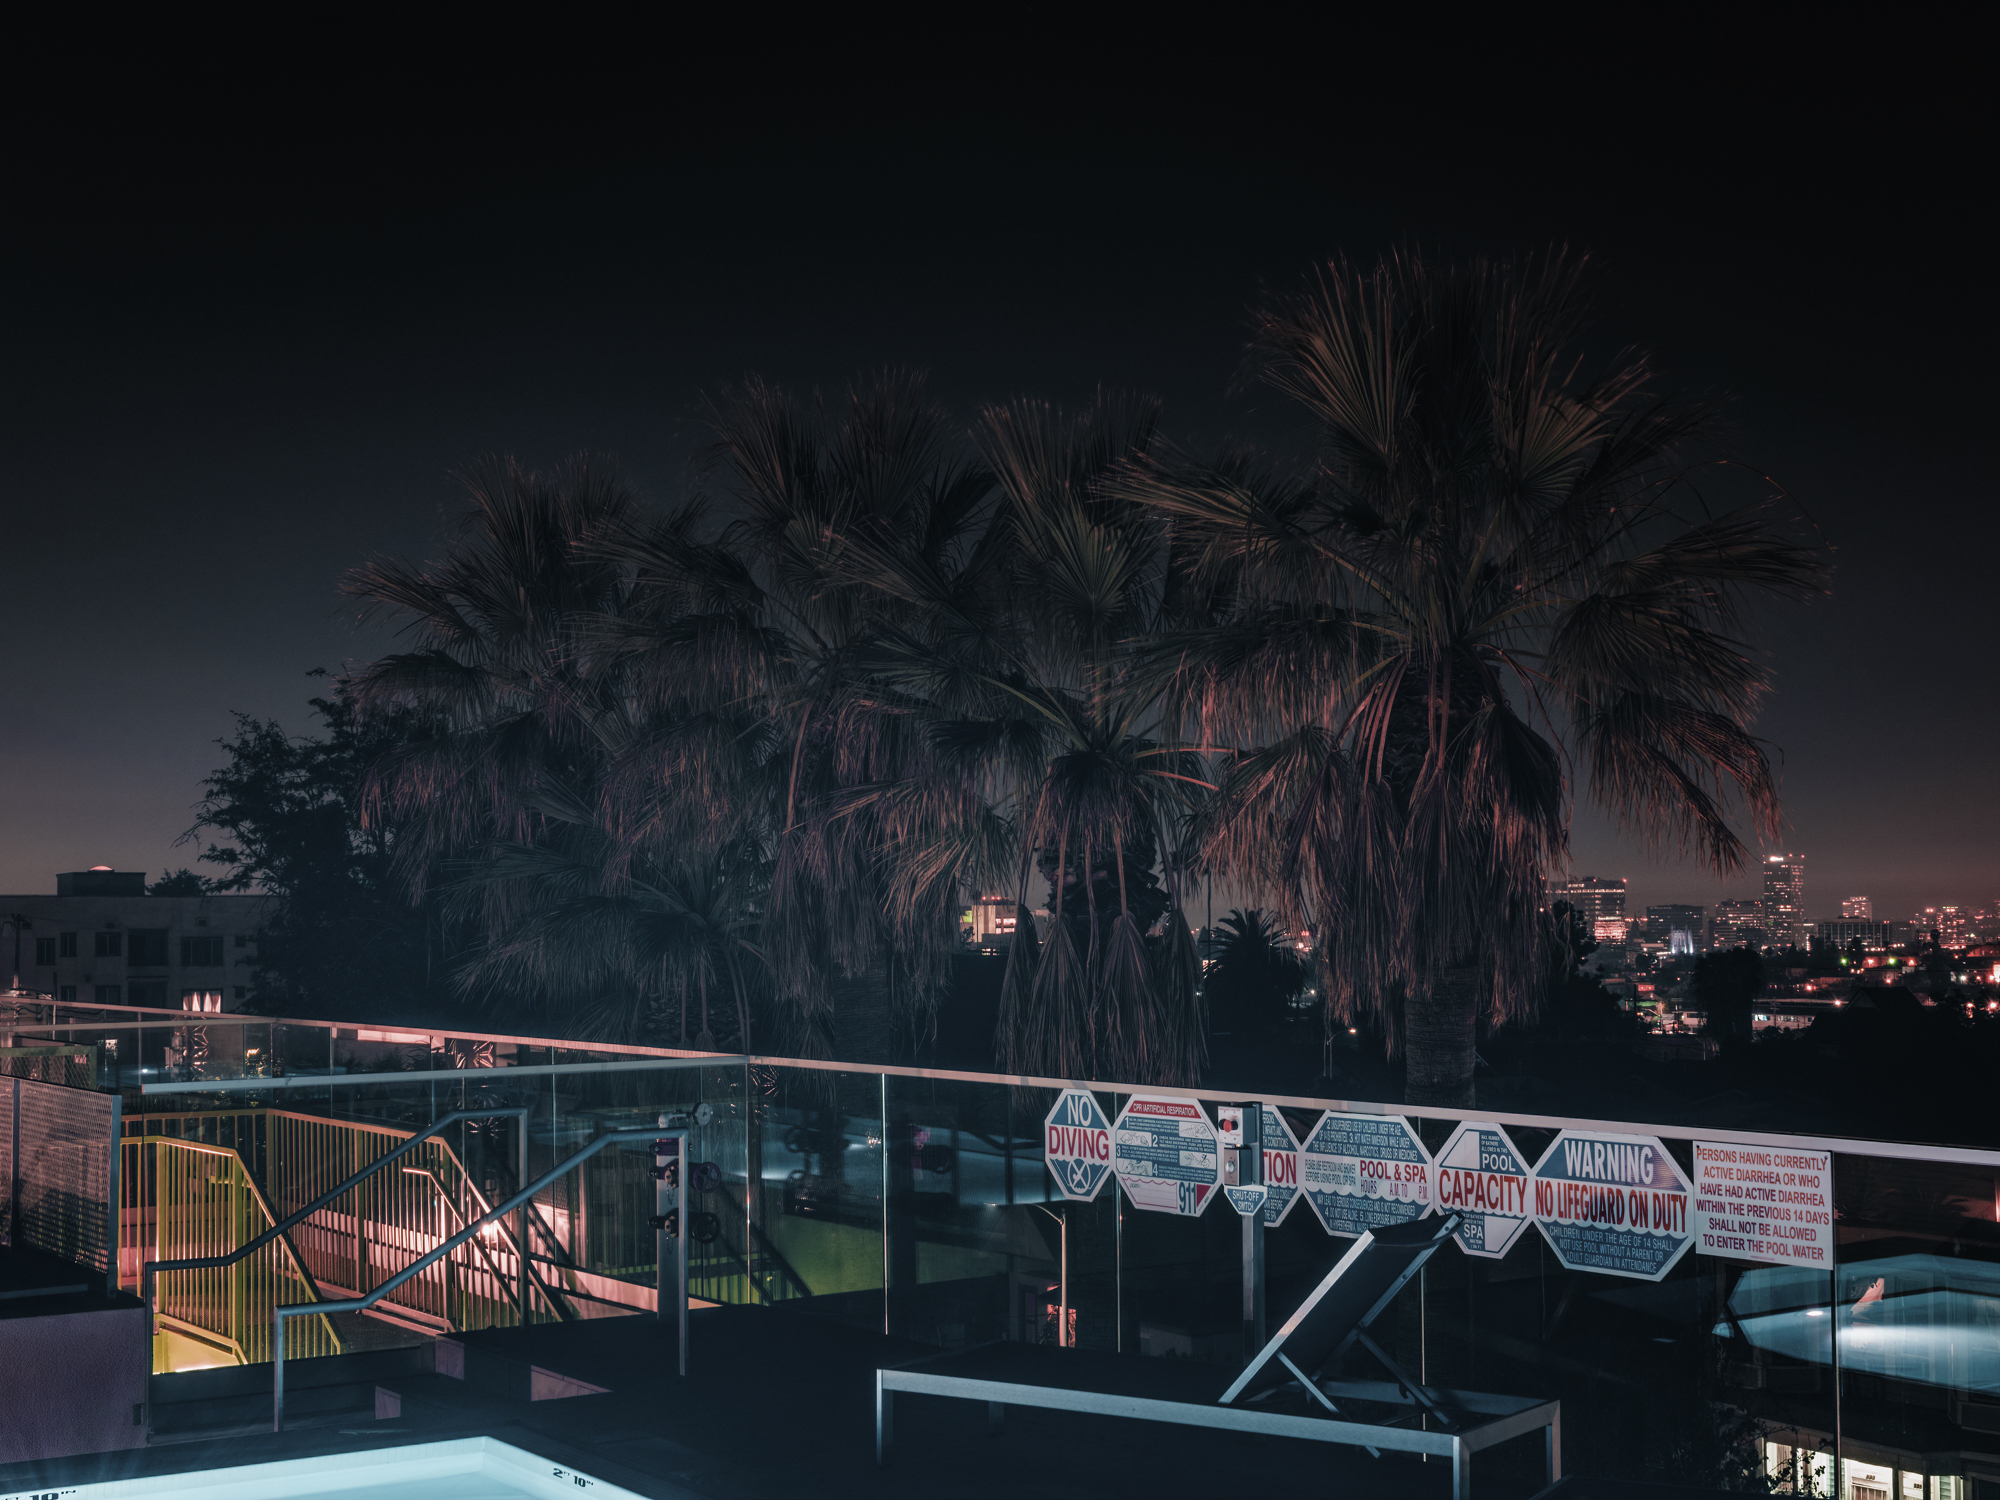    Palms from Rooftop Pool, Los Angeles, 2018.     Archival Pigment Print.  30” x 40” - Limited Edition of 2 | 24” x 32” - Limited Edition of 3 | 18” x 24” - Limited Edition of 5  Pricing &amp; Purchase Info:  Leon Gallery  